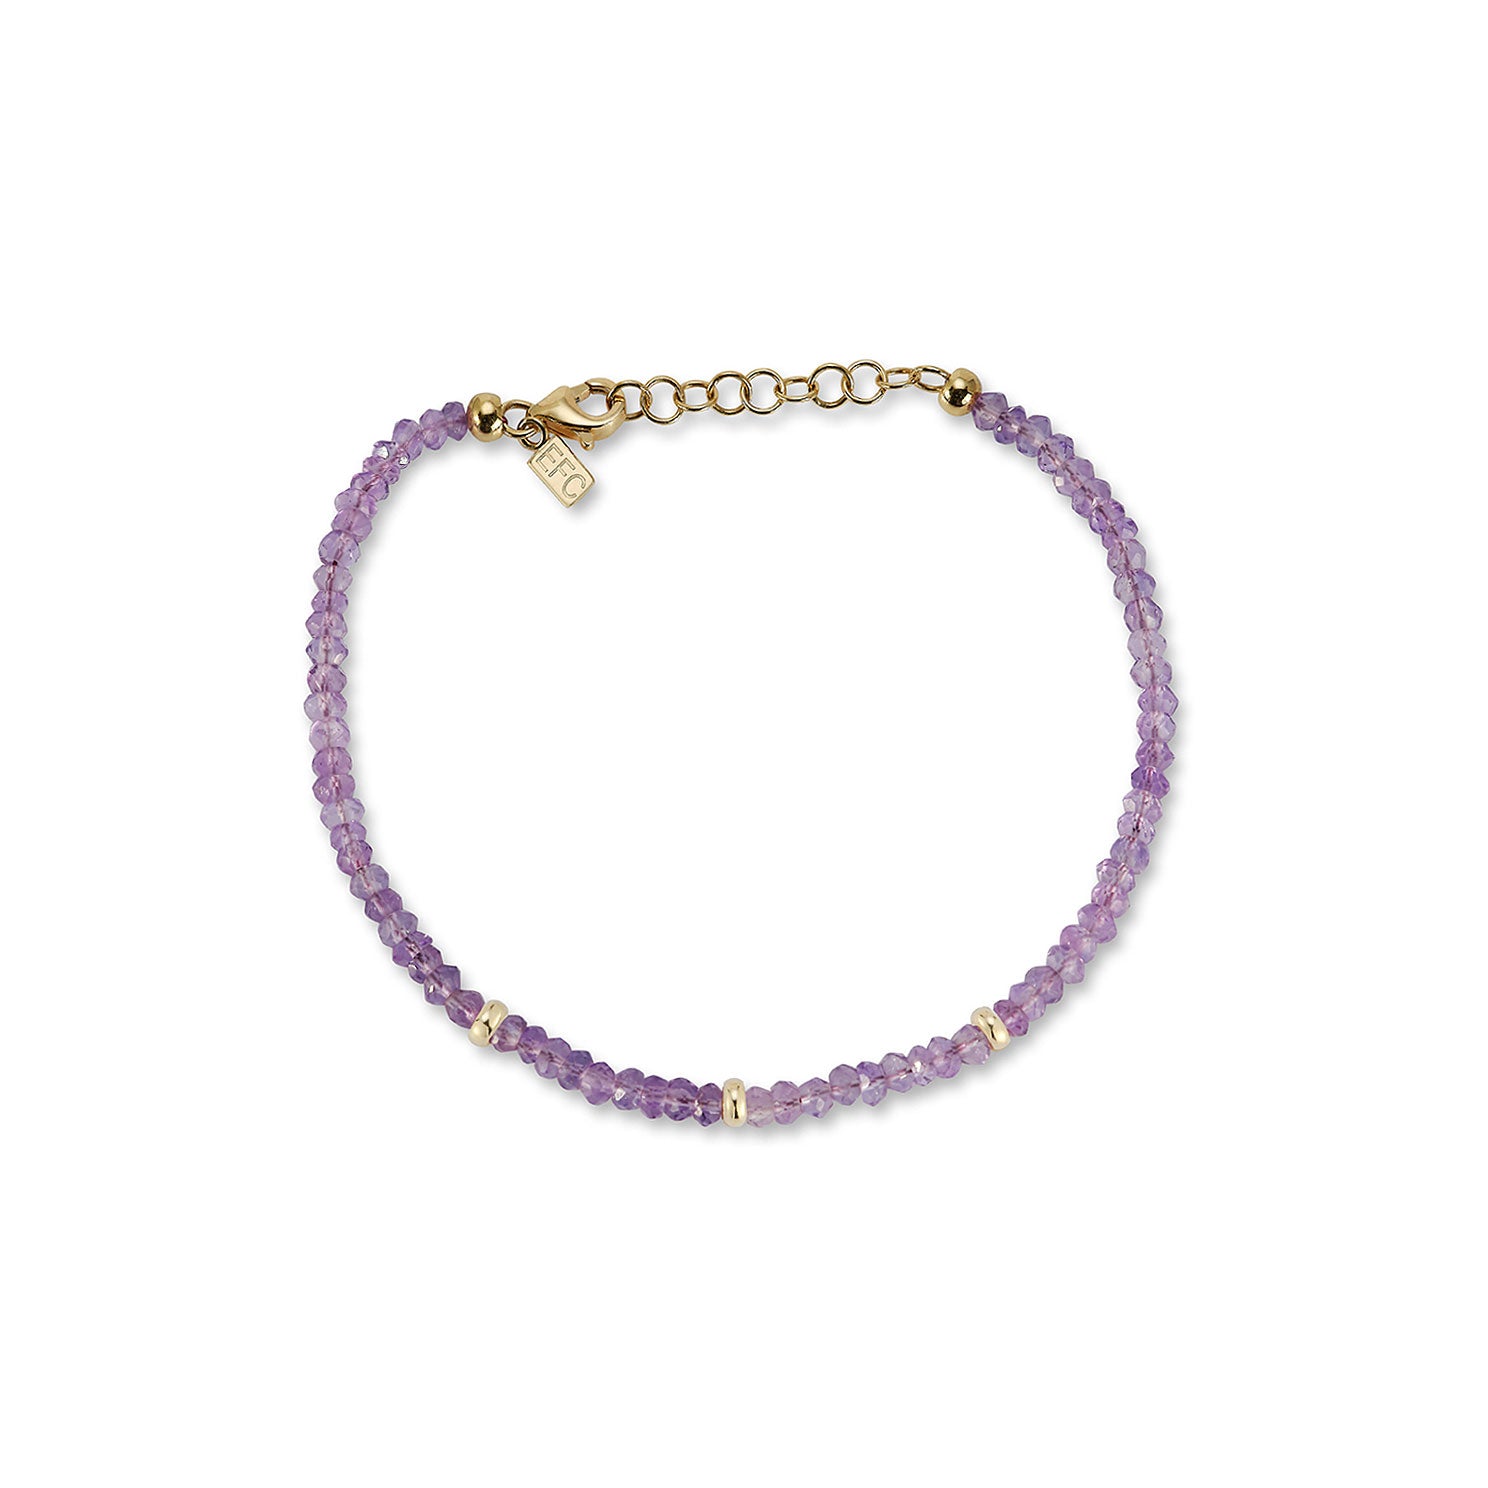 Birthstone Bead Bracelet In Amethyst with 14k yellow gold chain